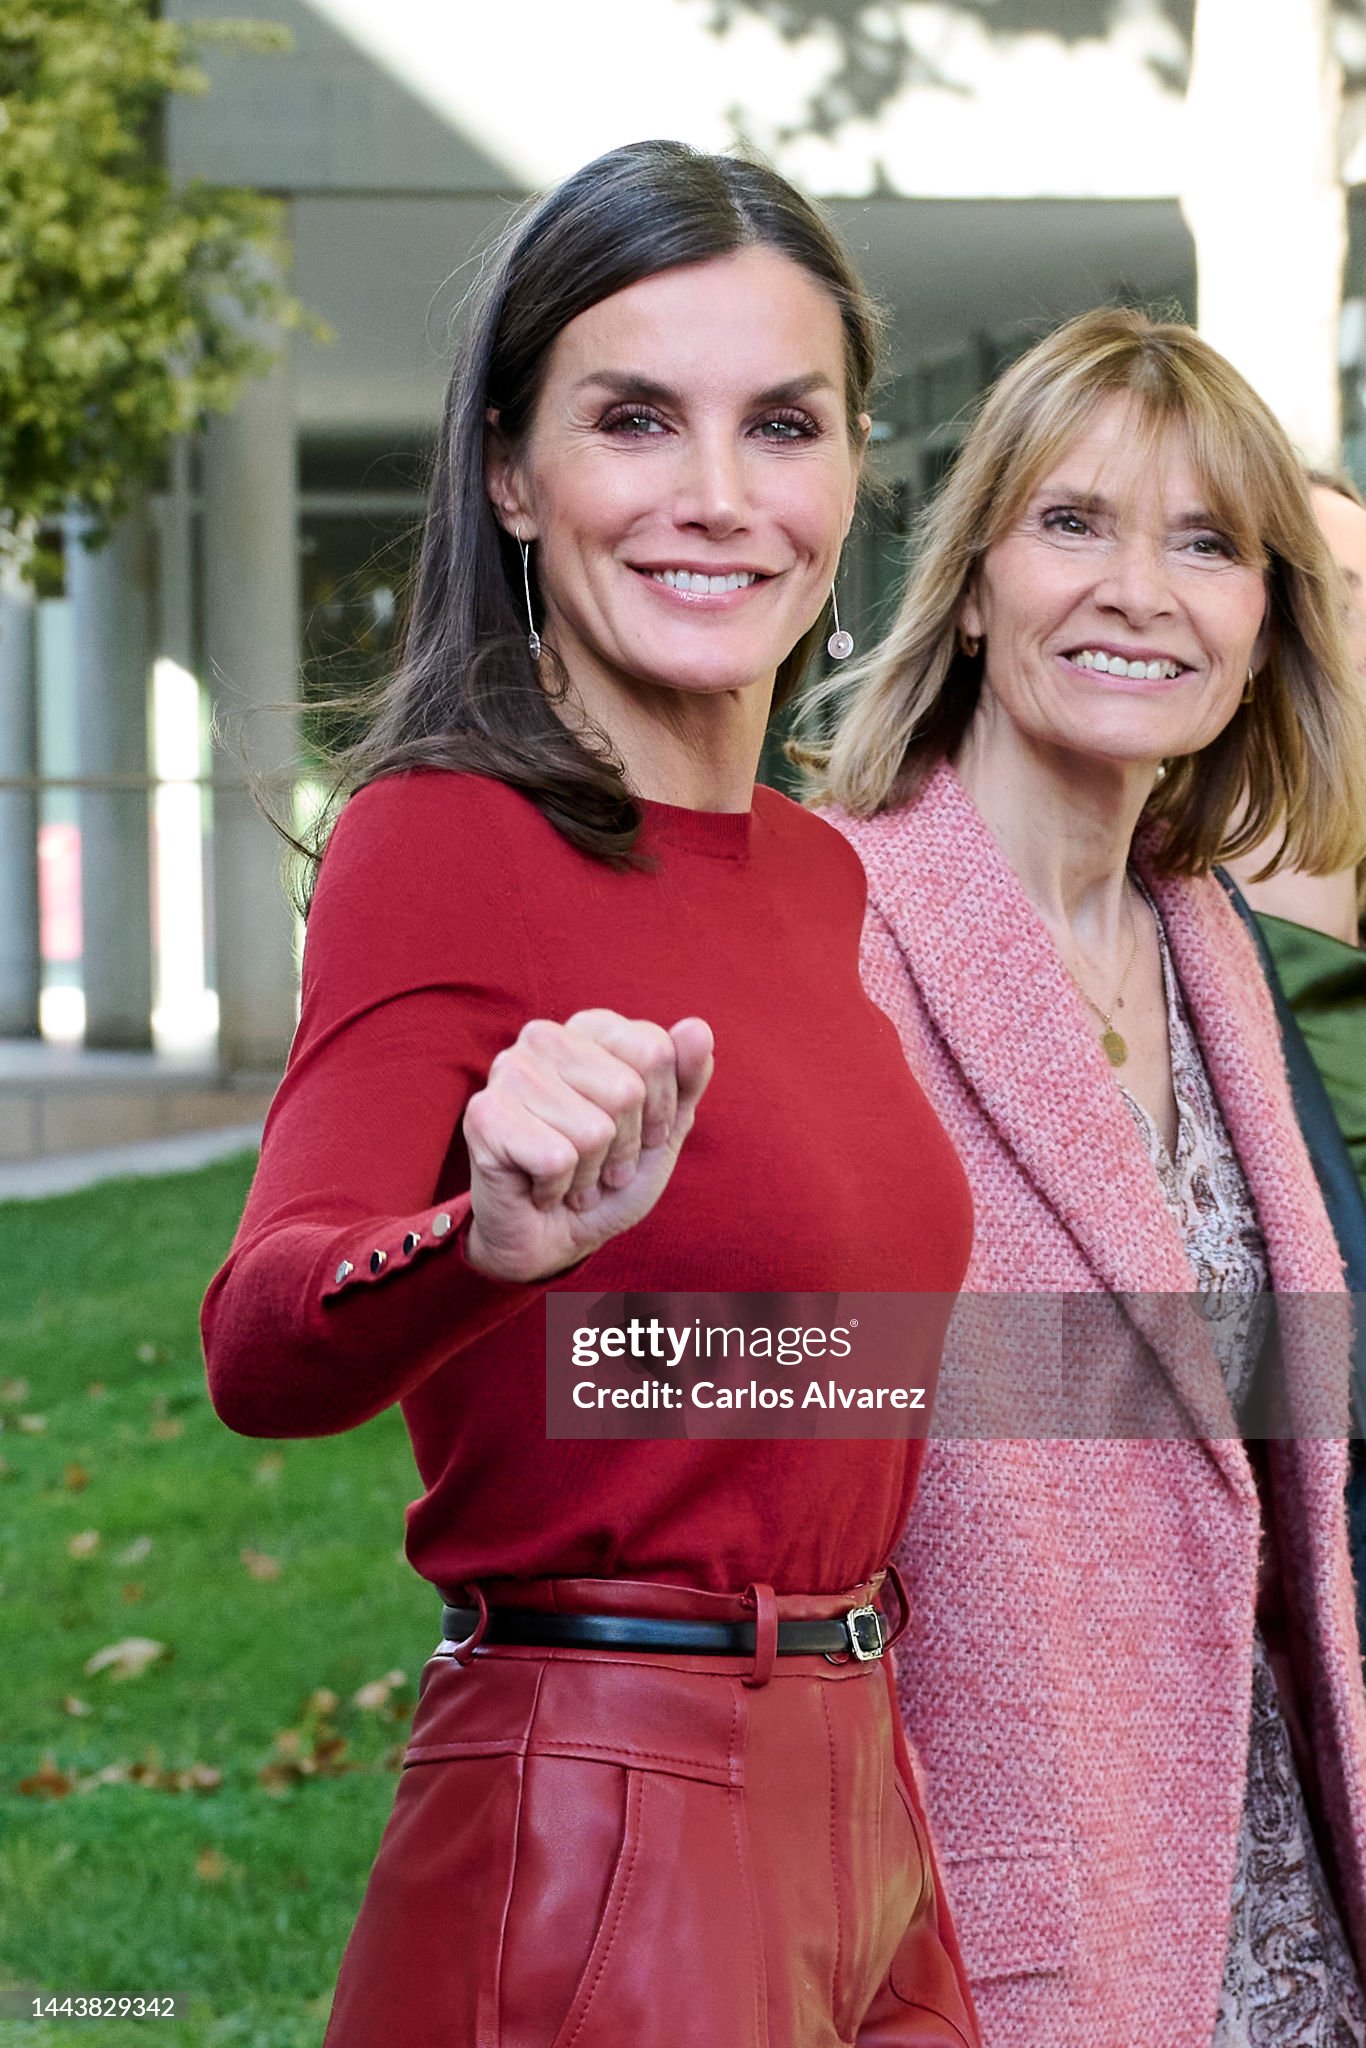 queen-letizia-of-spain-attends-events-related-to-mental-health-and-intellectual-disabilities.jpg?s=2048x2048&w=gi&k=20&c=ewa0twjaSZ6e1HCZ5a7SKIYWFwbB5tDHX4jZE-BHPWo=